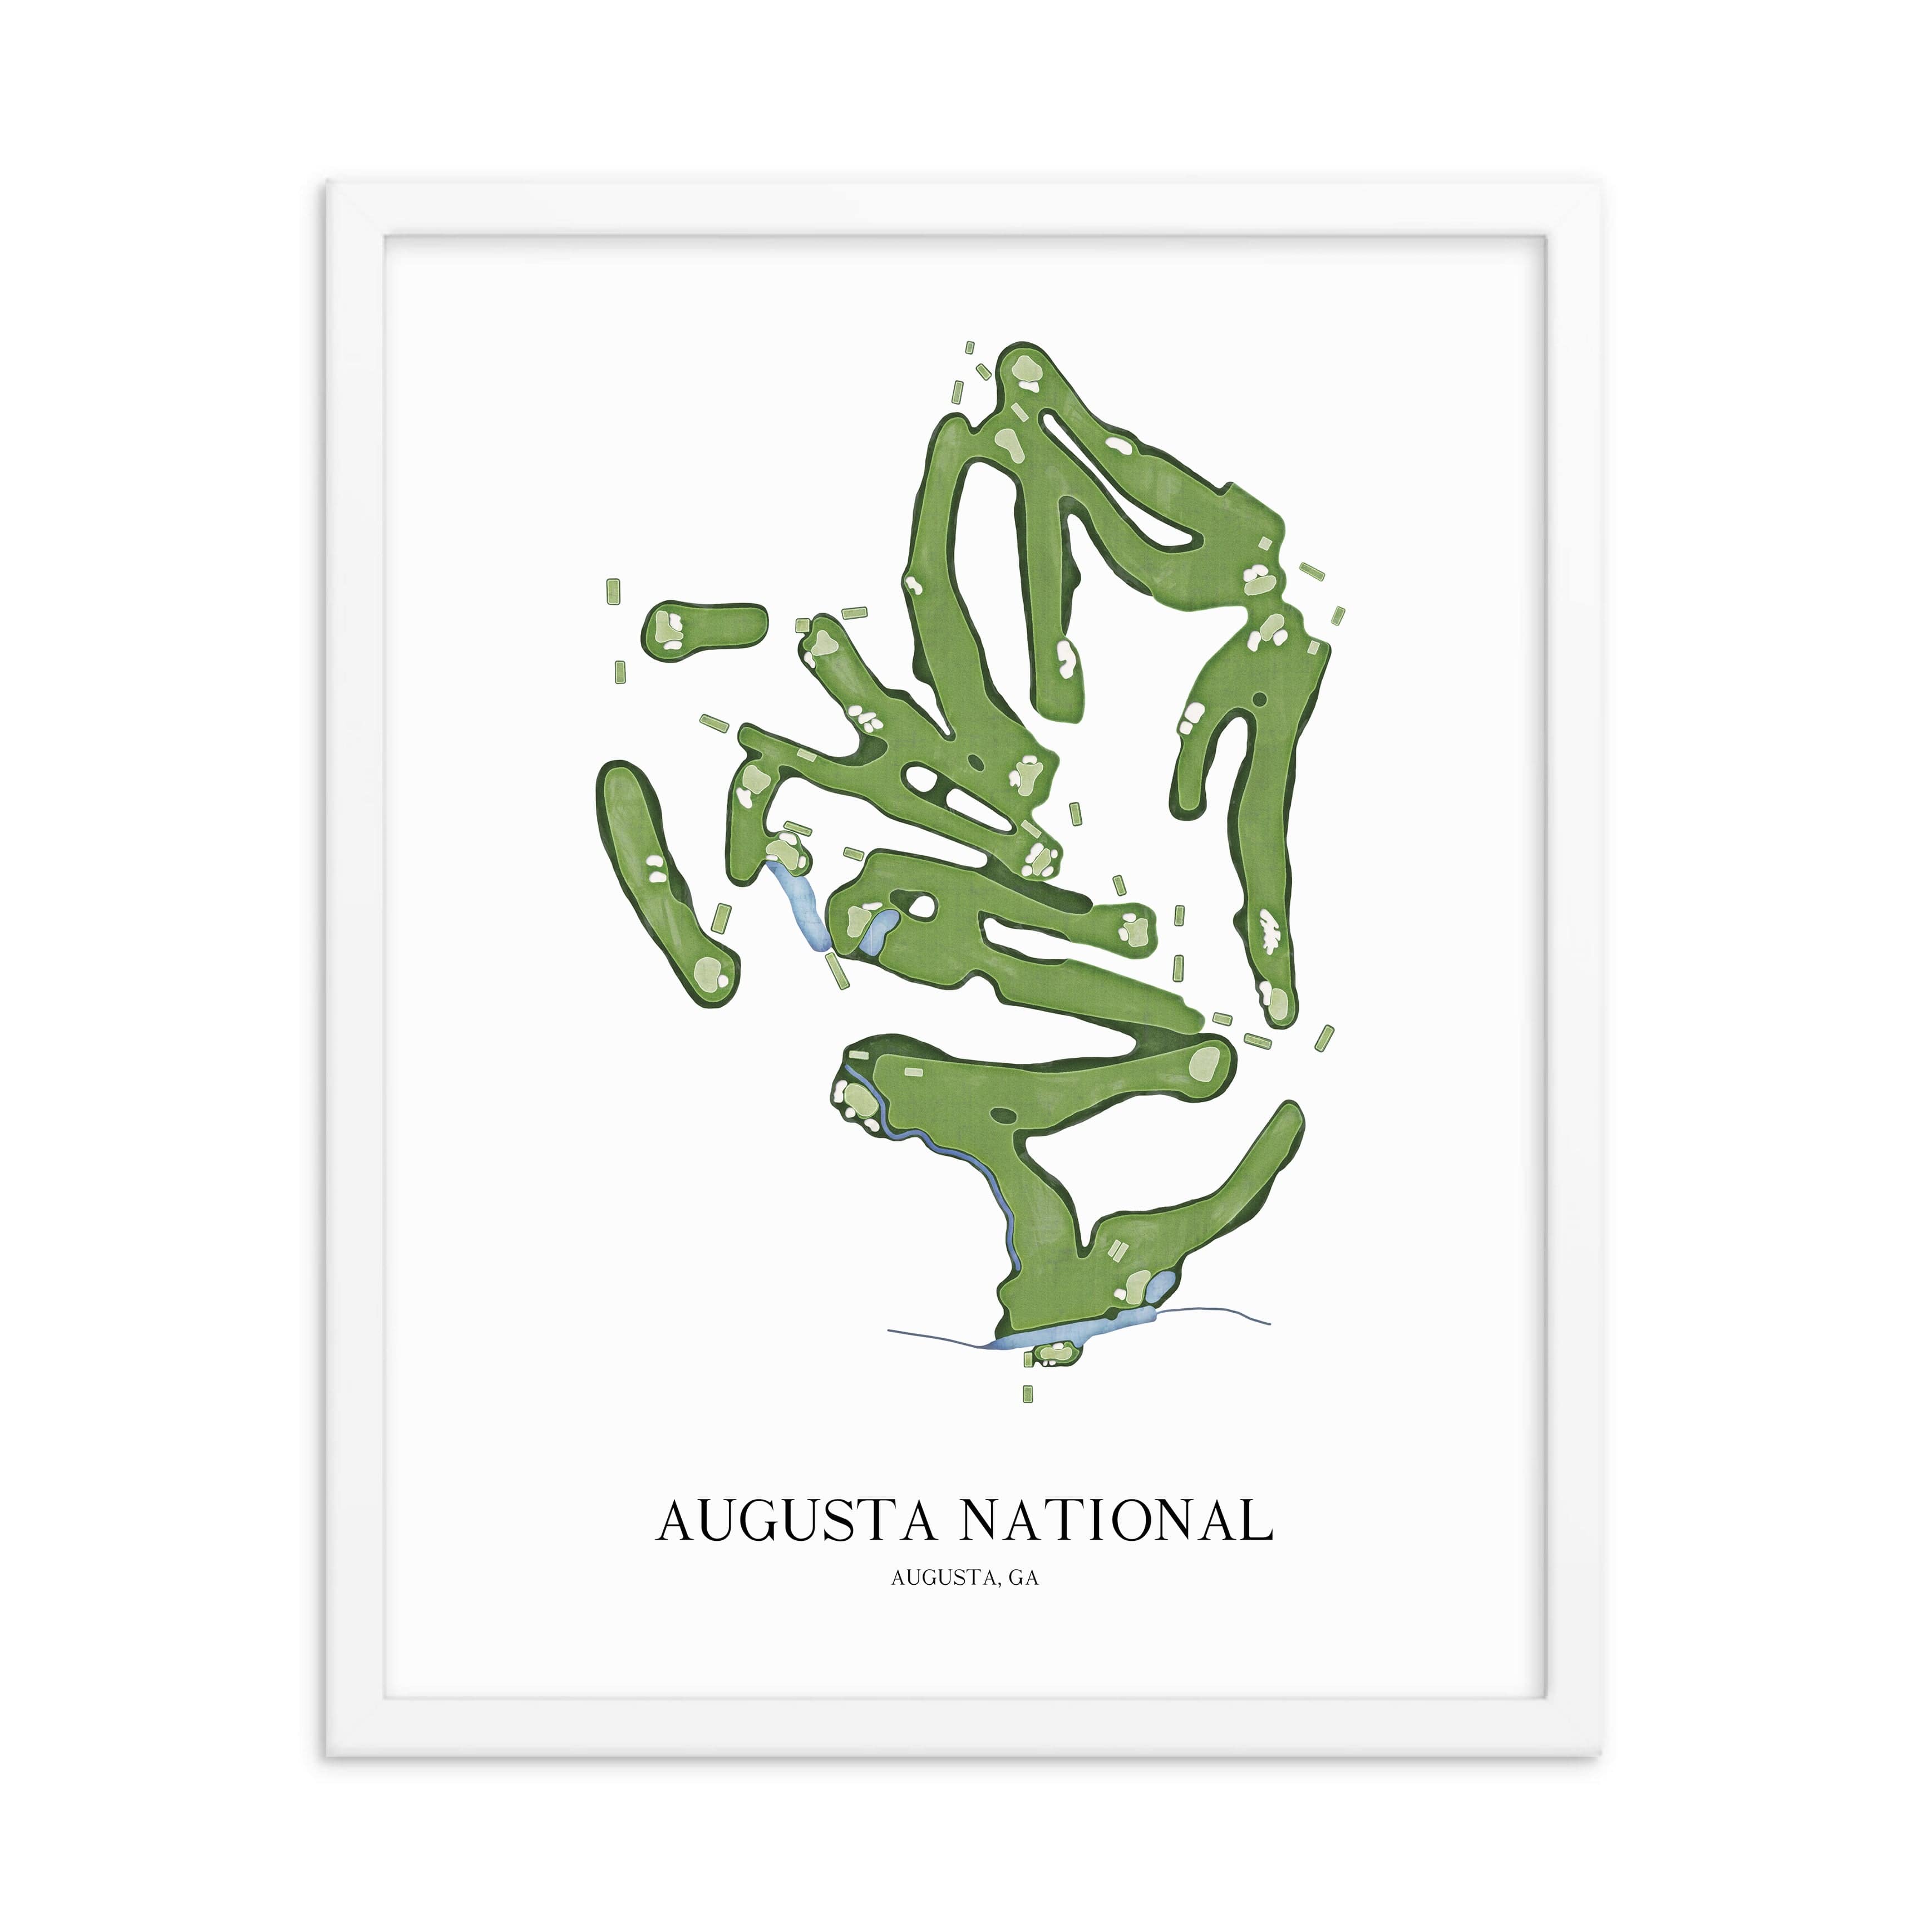 The 19th Hole Golf Shop - Golf Course Prints -  8" x 10" / White Augusta National Golf Course Map